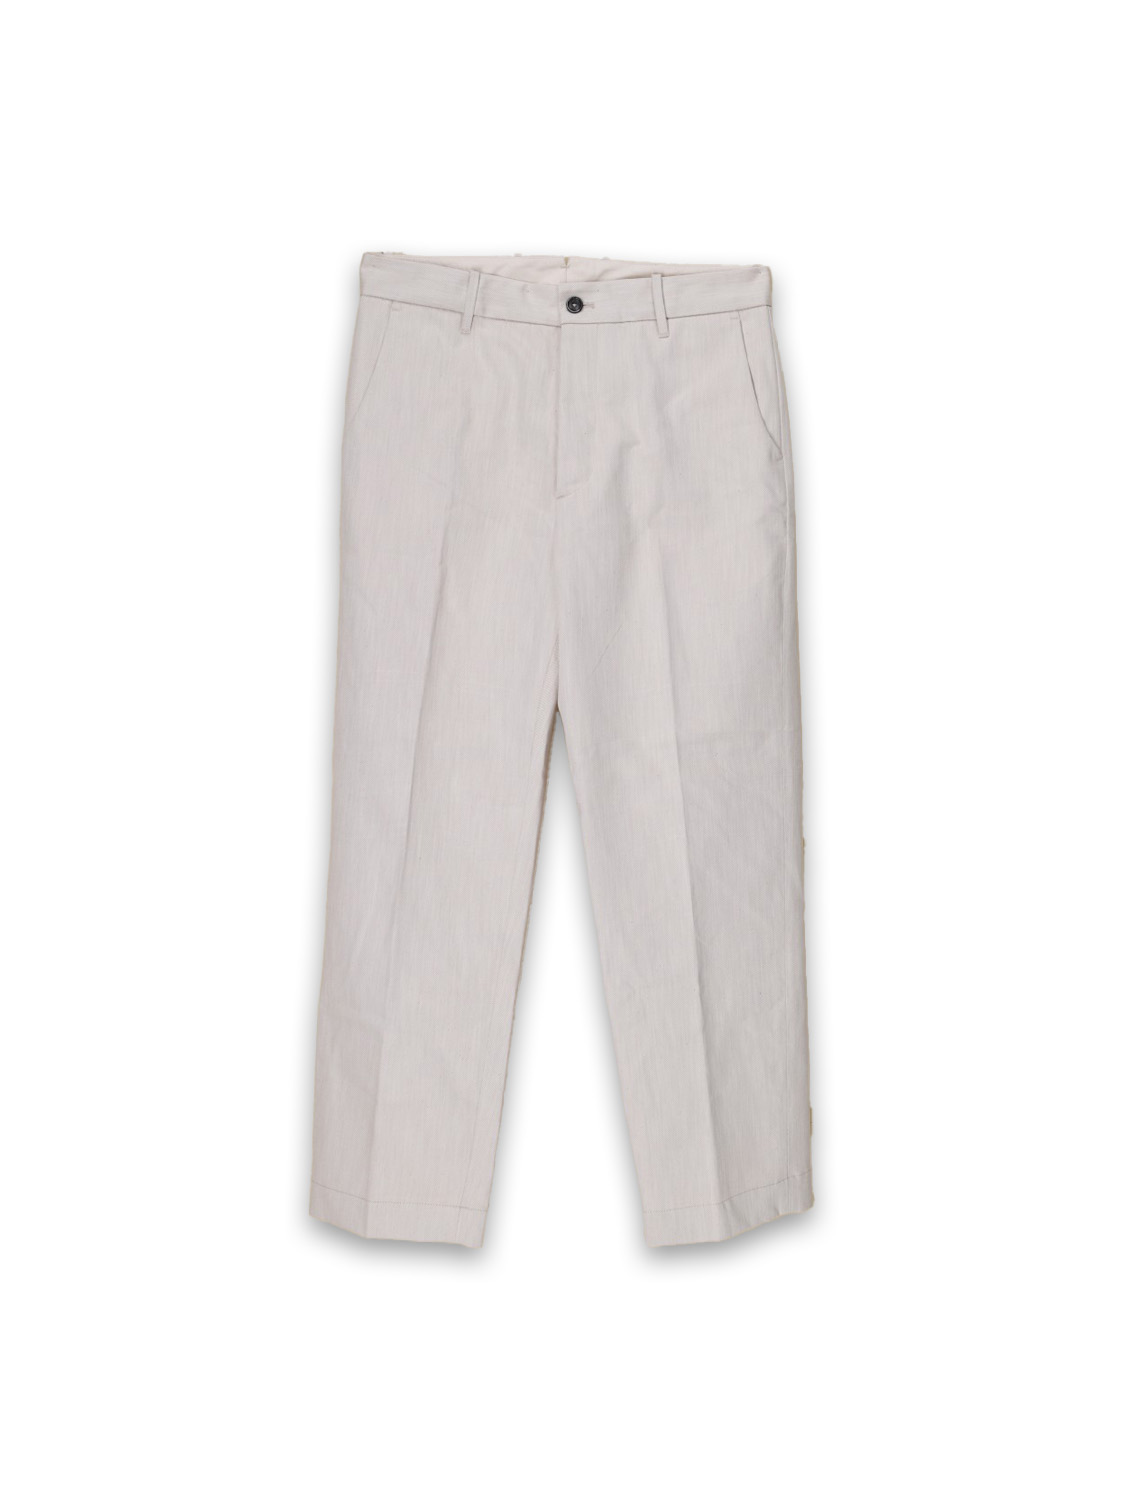 nine in the morning Apollon - Linen chino-style pants   beige 48